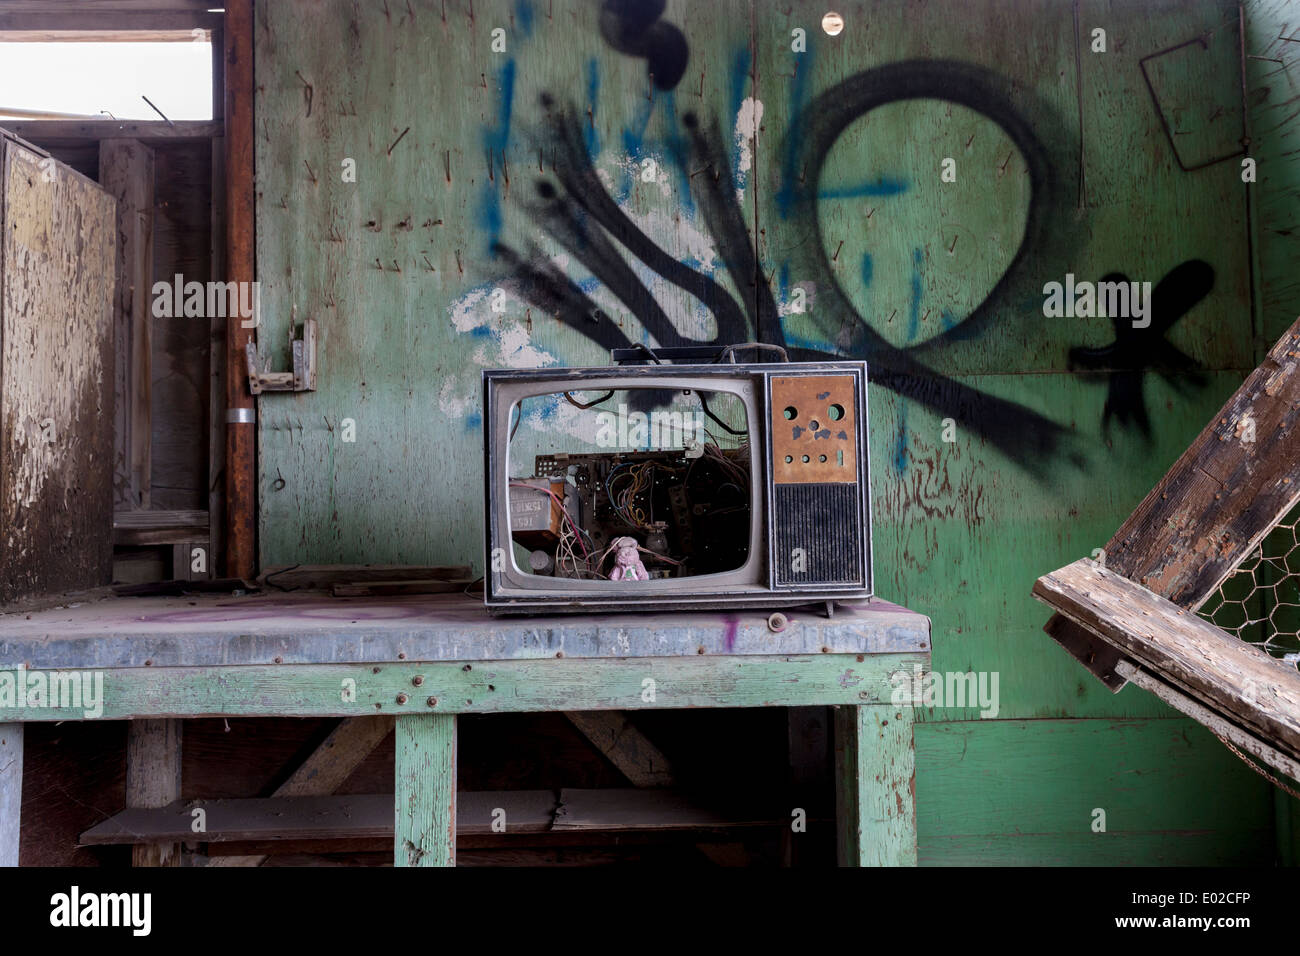 Old TV set in an Abandoned house in Salton Sea Stock Photo